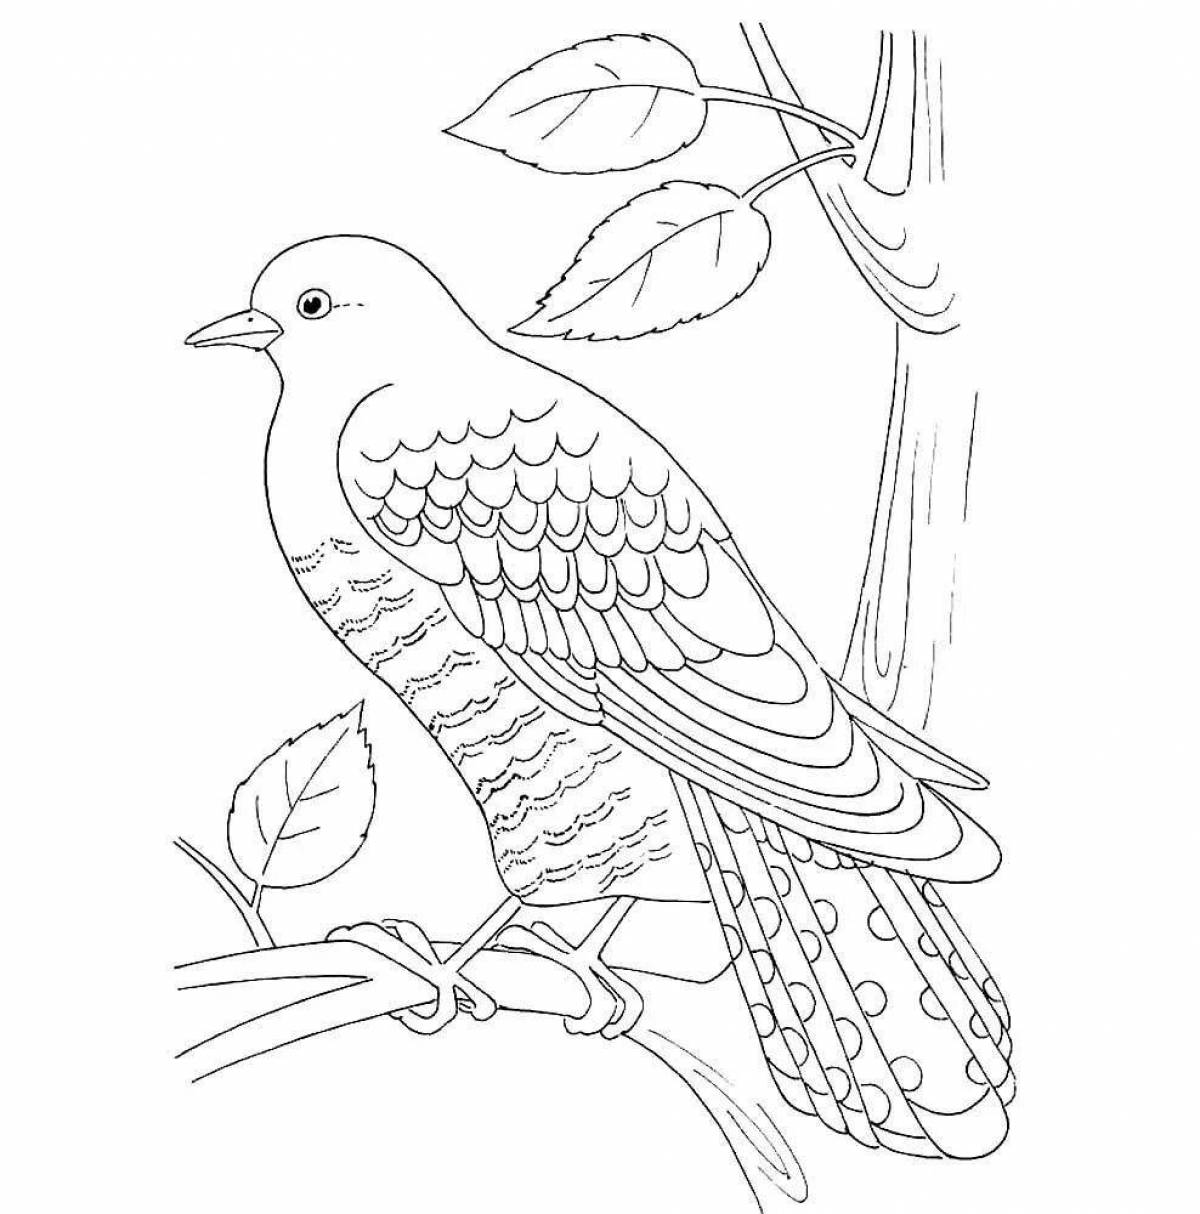 Zestful cuckoo coloring page for students